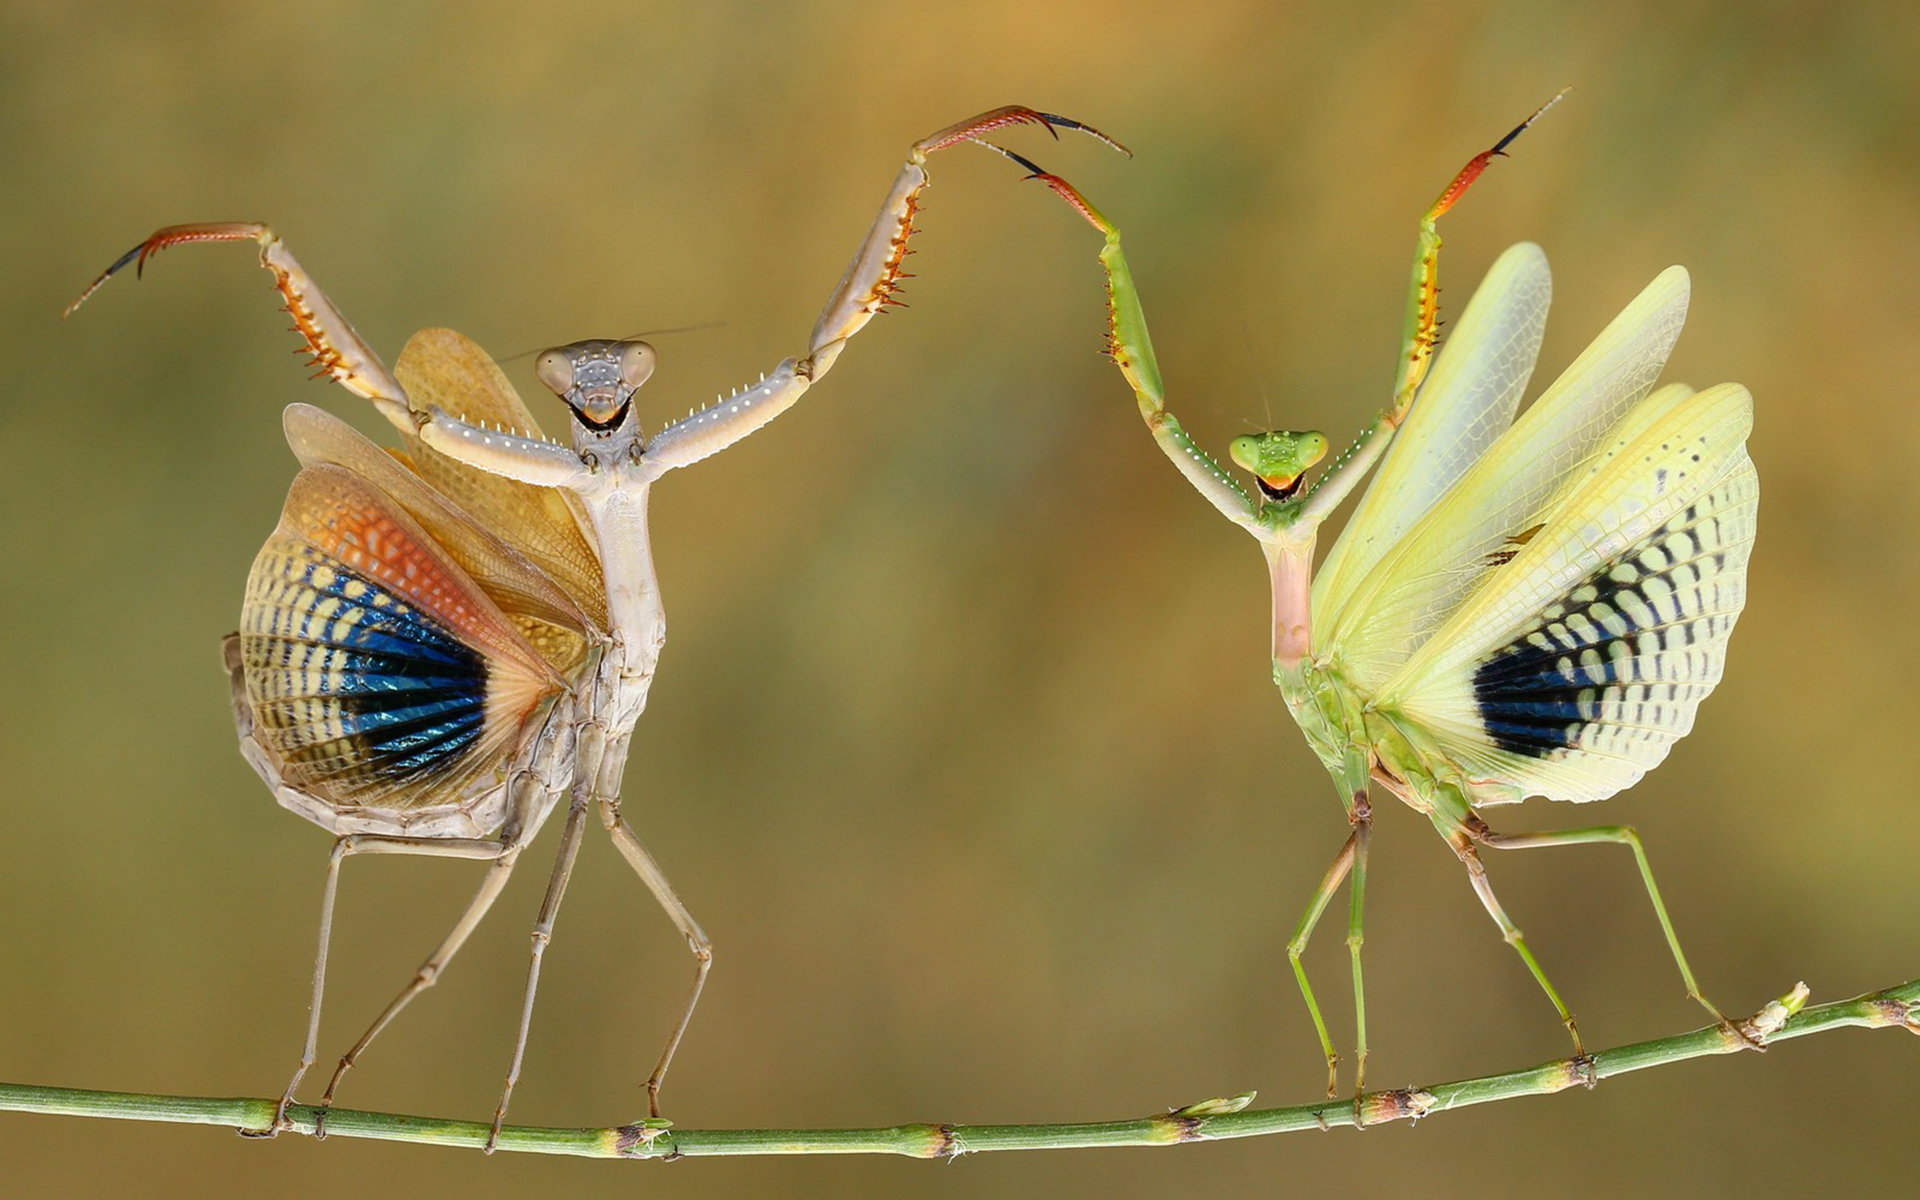 Grasshopper Insect Animal 1920x1200